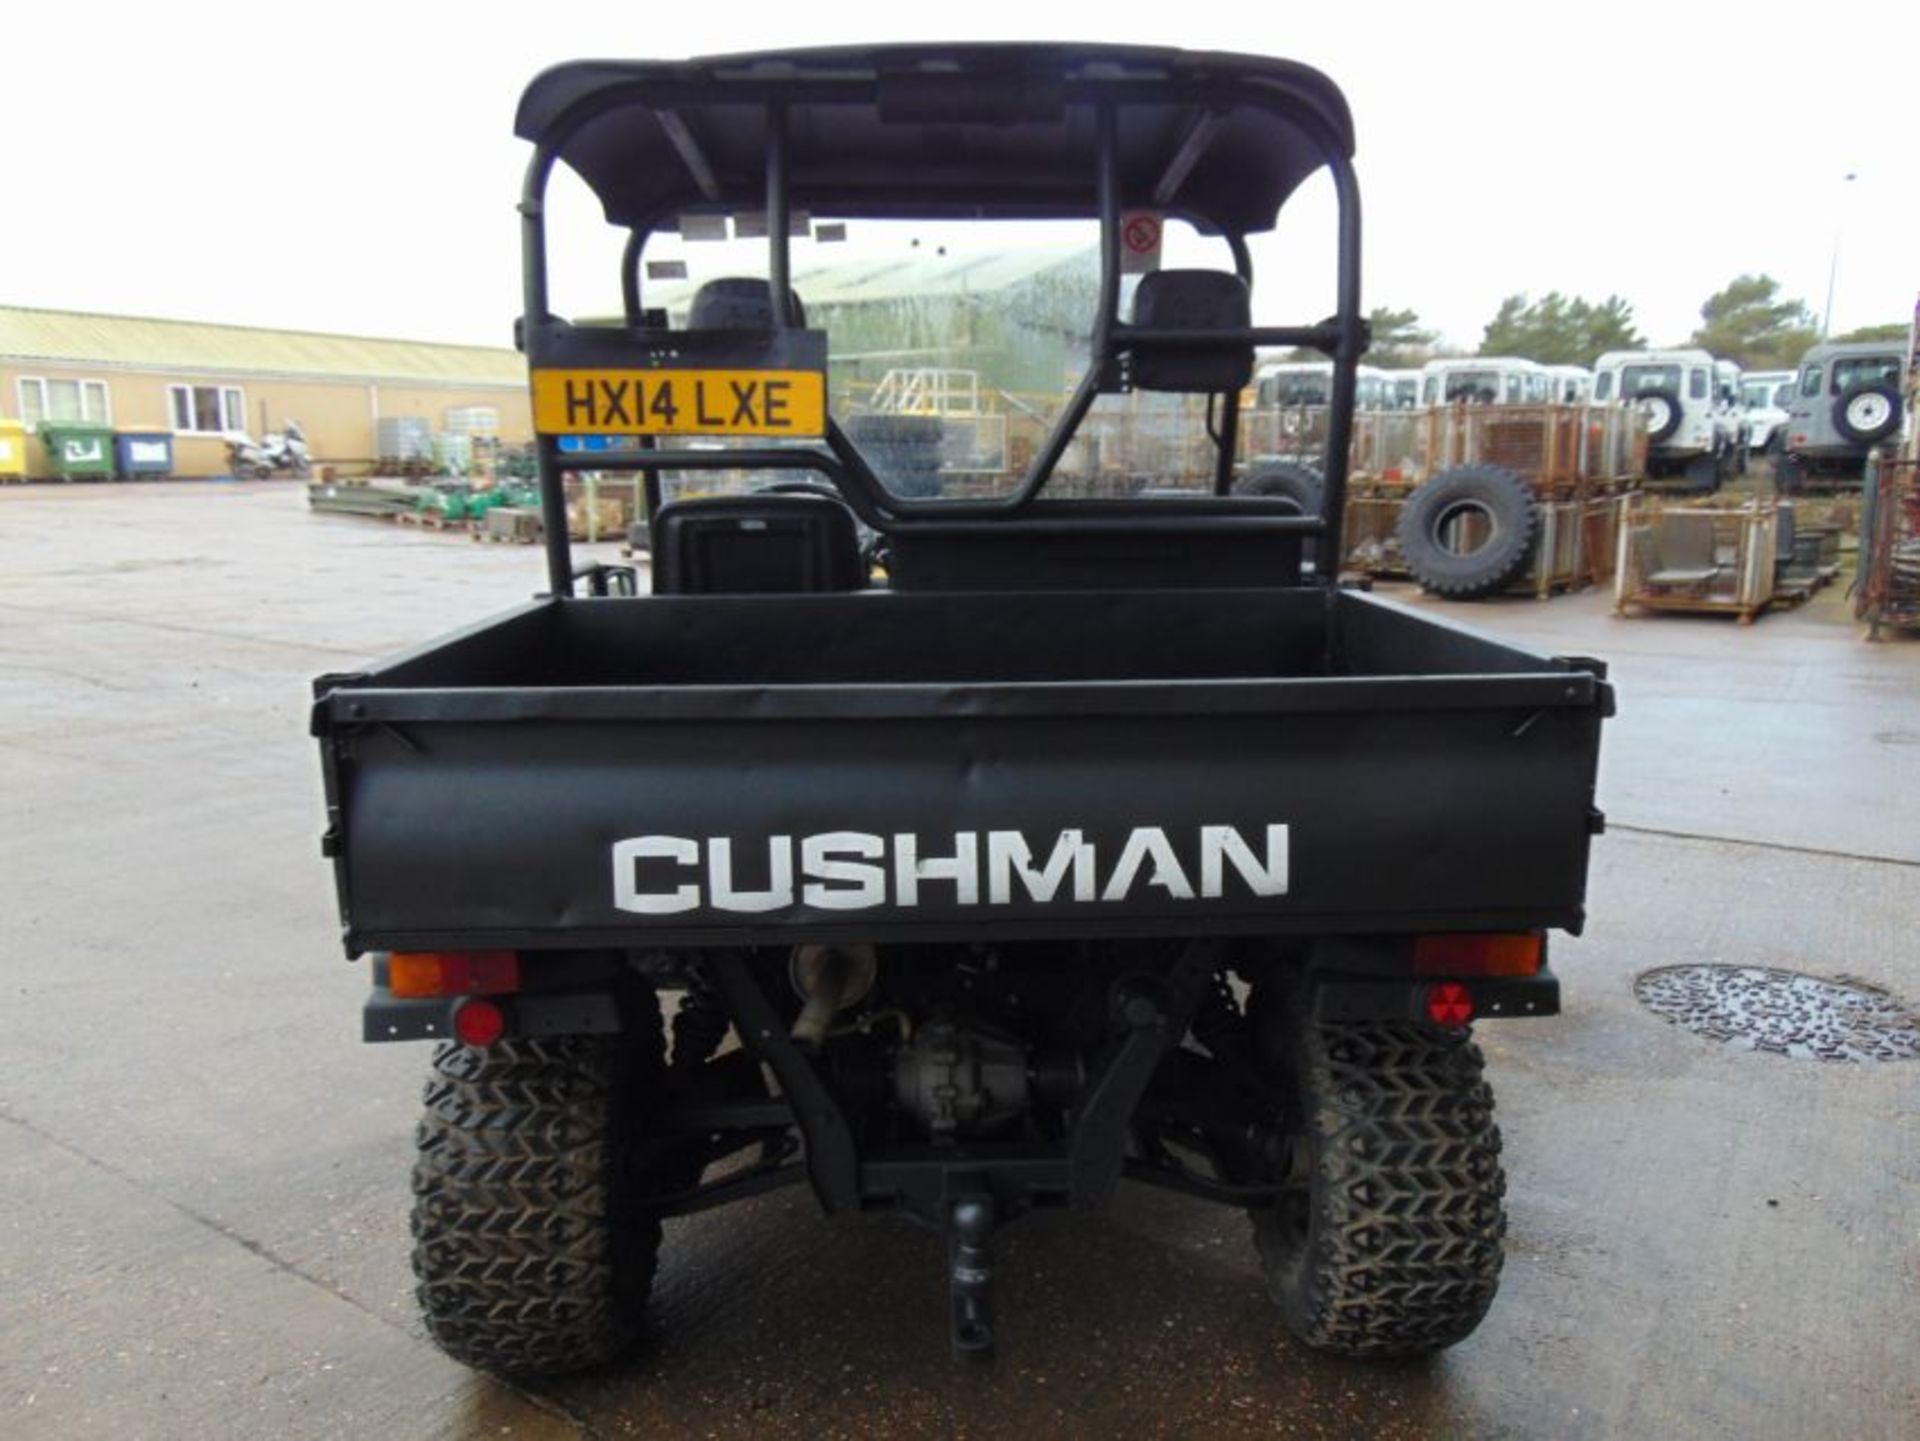 2014 Cushman XD1600 4x4 Diesel Utility Vehicle Showing 1104 hrs - Image 7 of 25